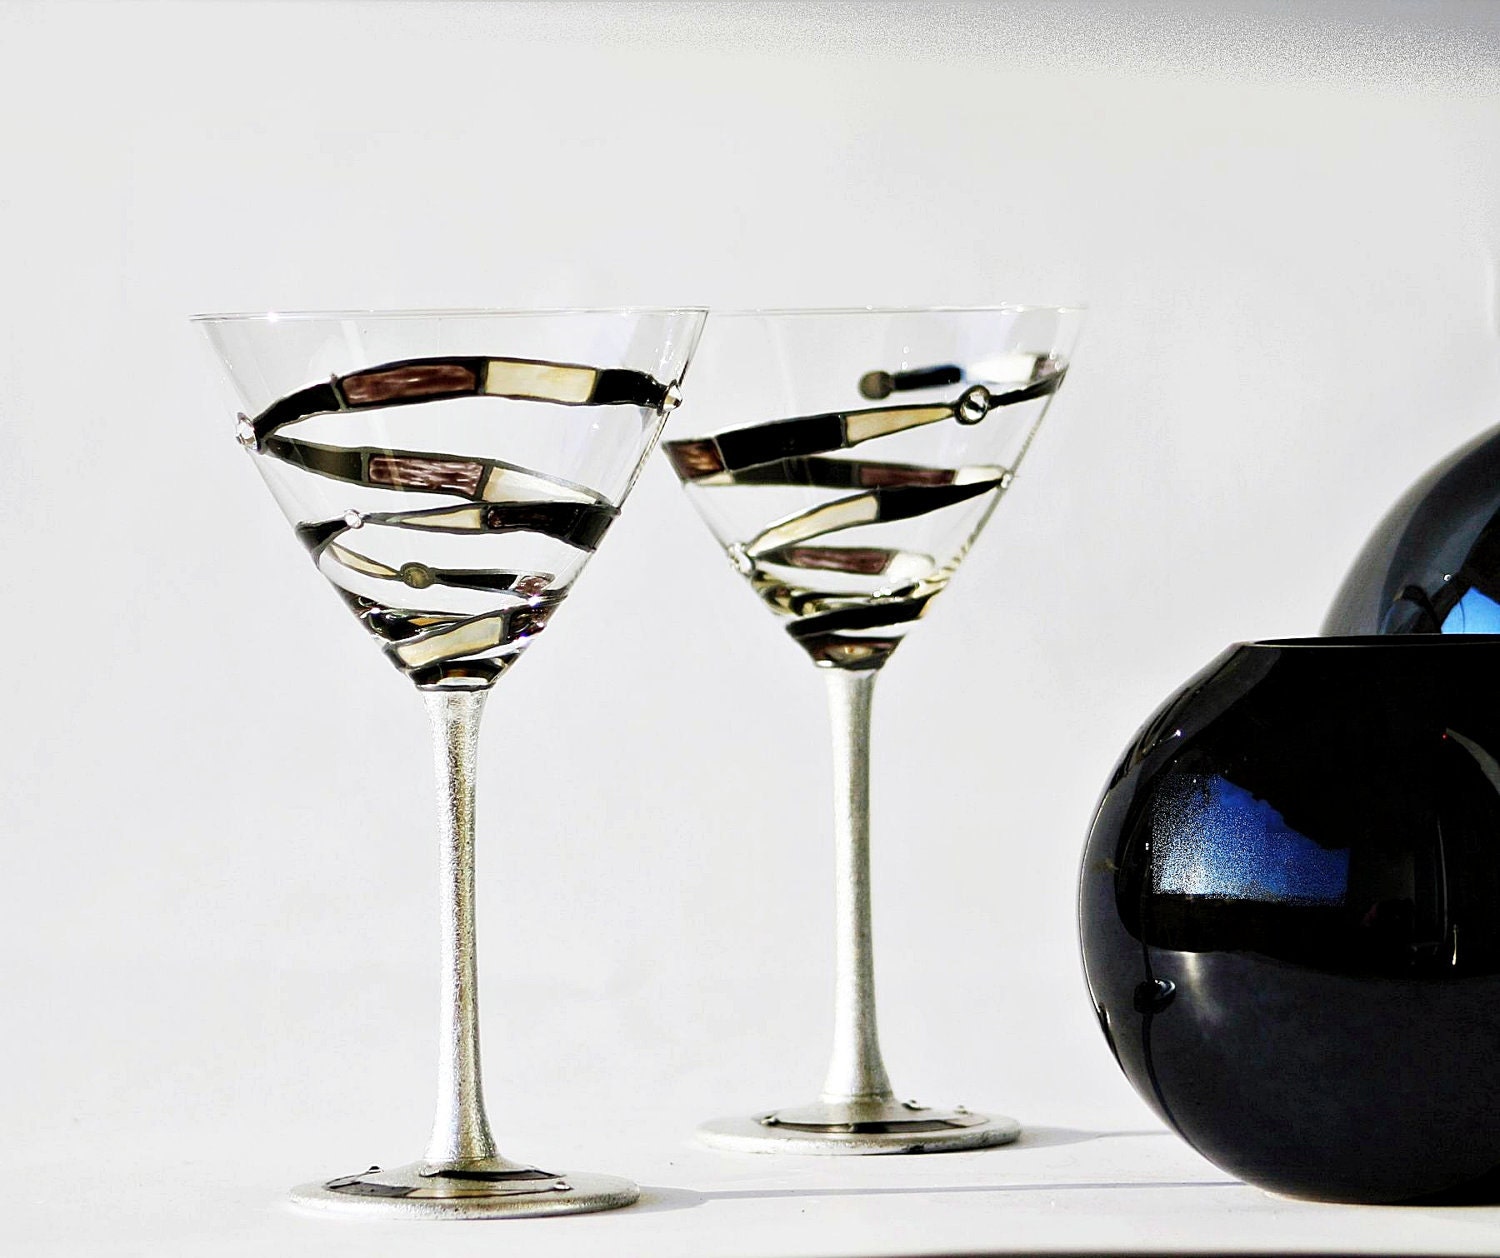 Martini Glasess Spiral Hand Painted Set of 2  Swarovski Crystal Decorated, Black Gray, Wgite, Silver